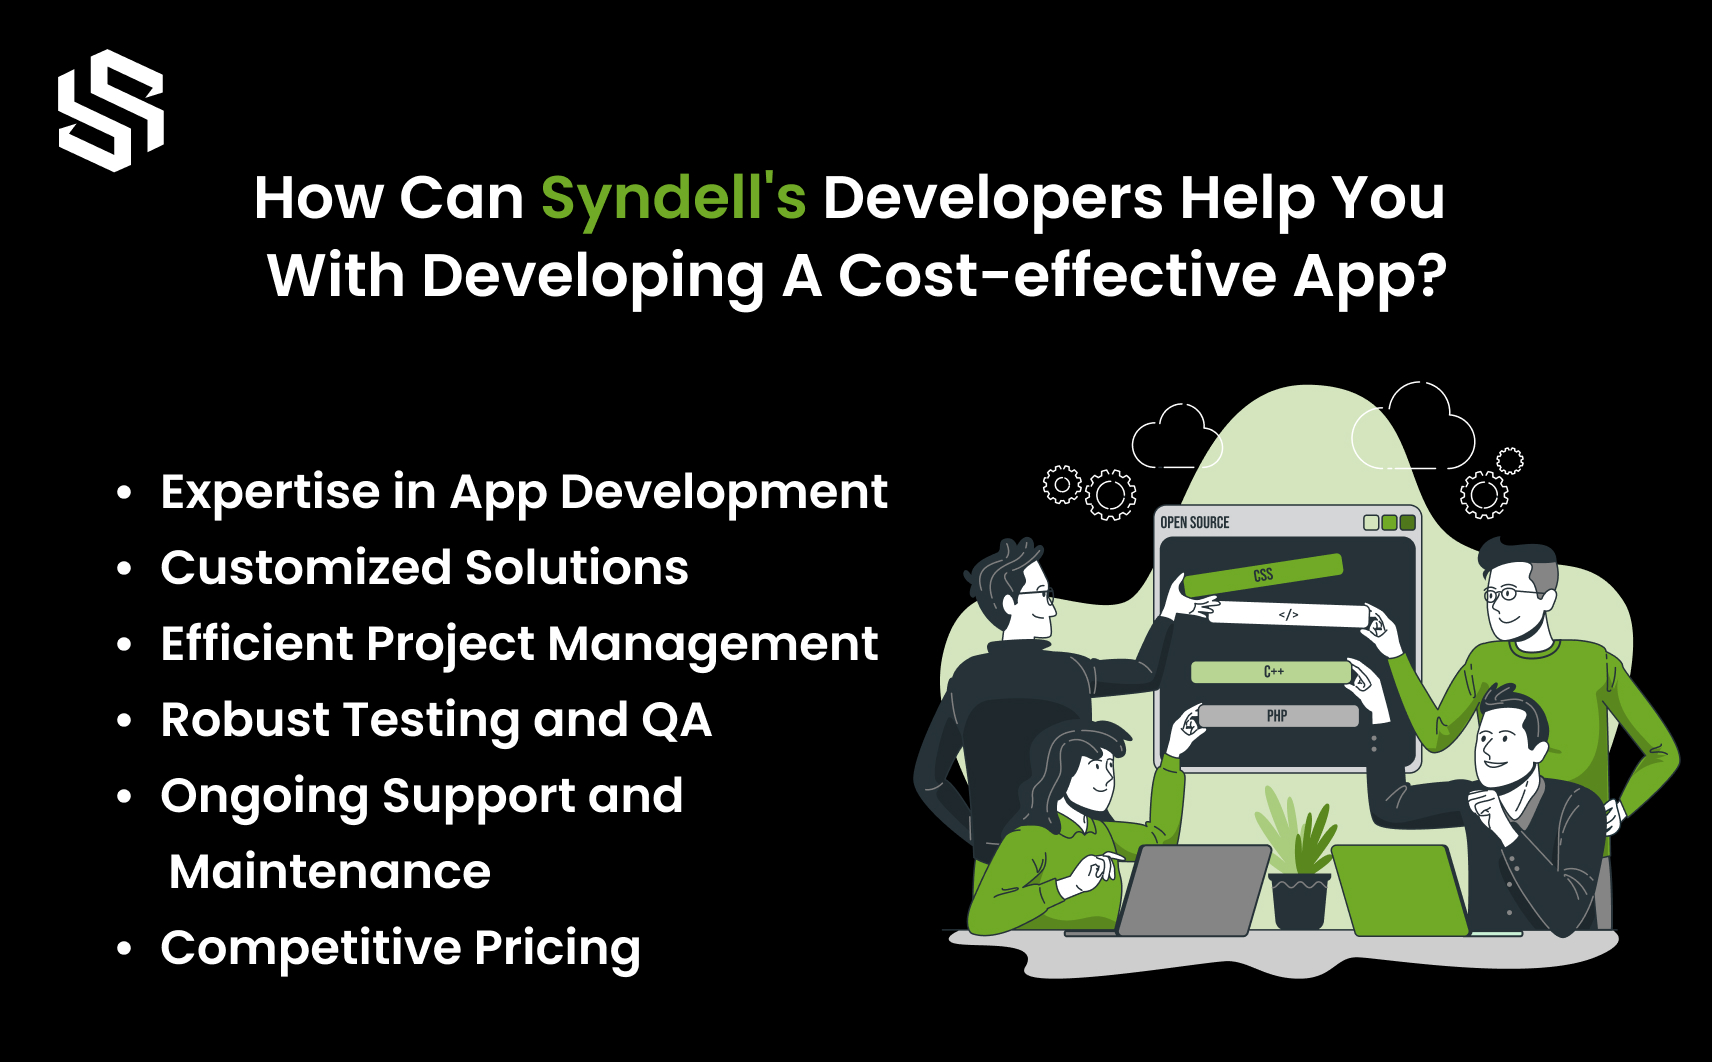 How can Syndell's Developers help you with developing a cost-effective app